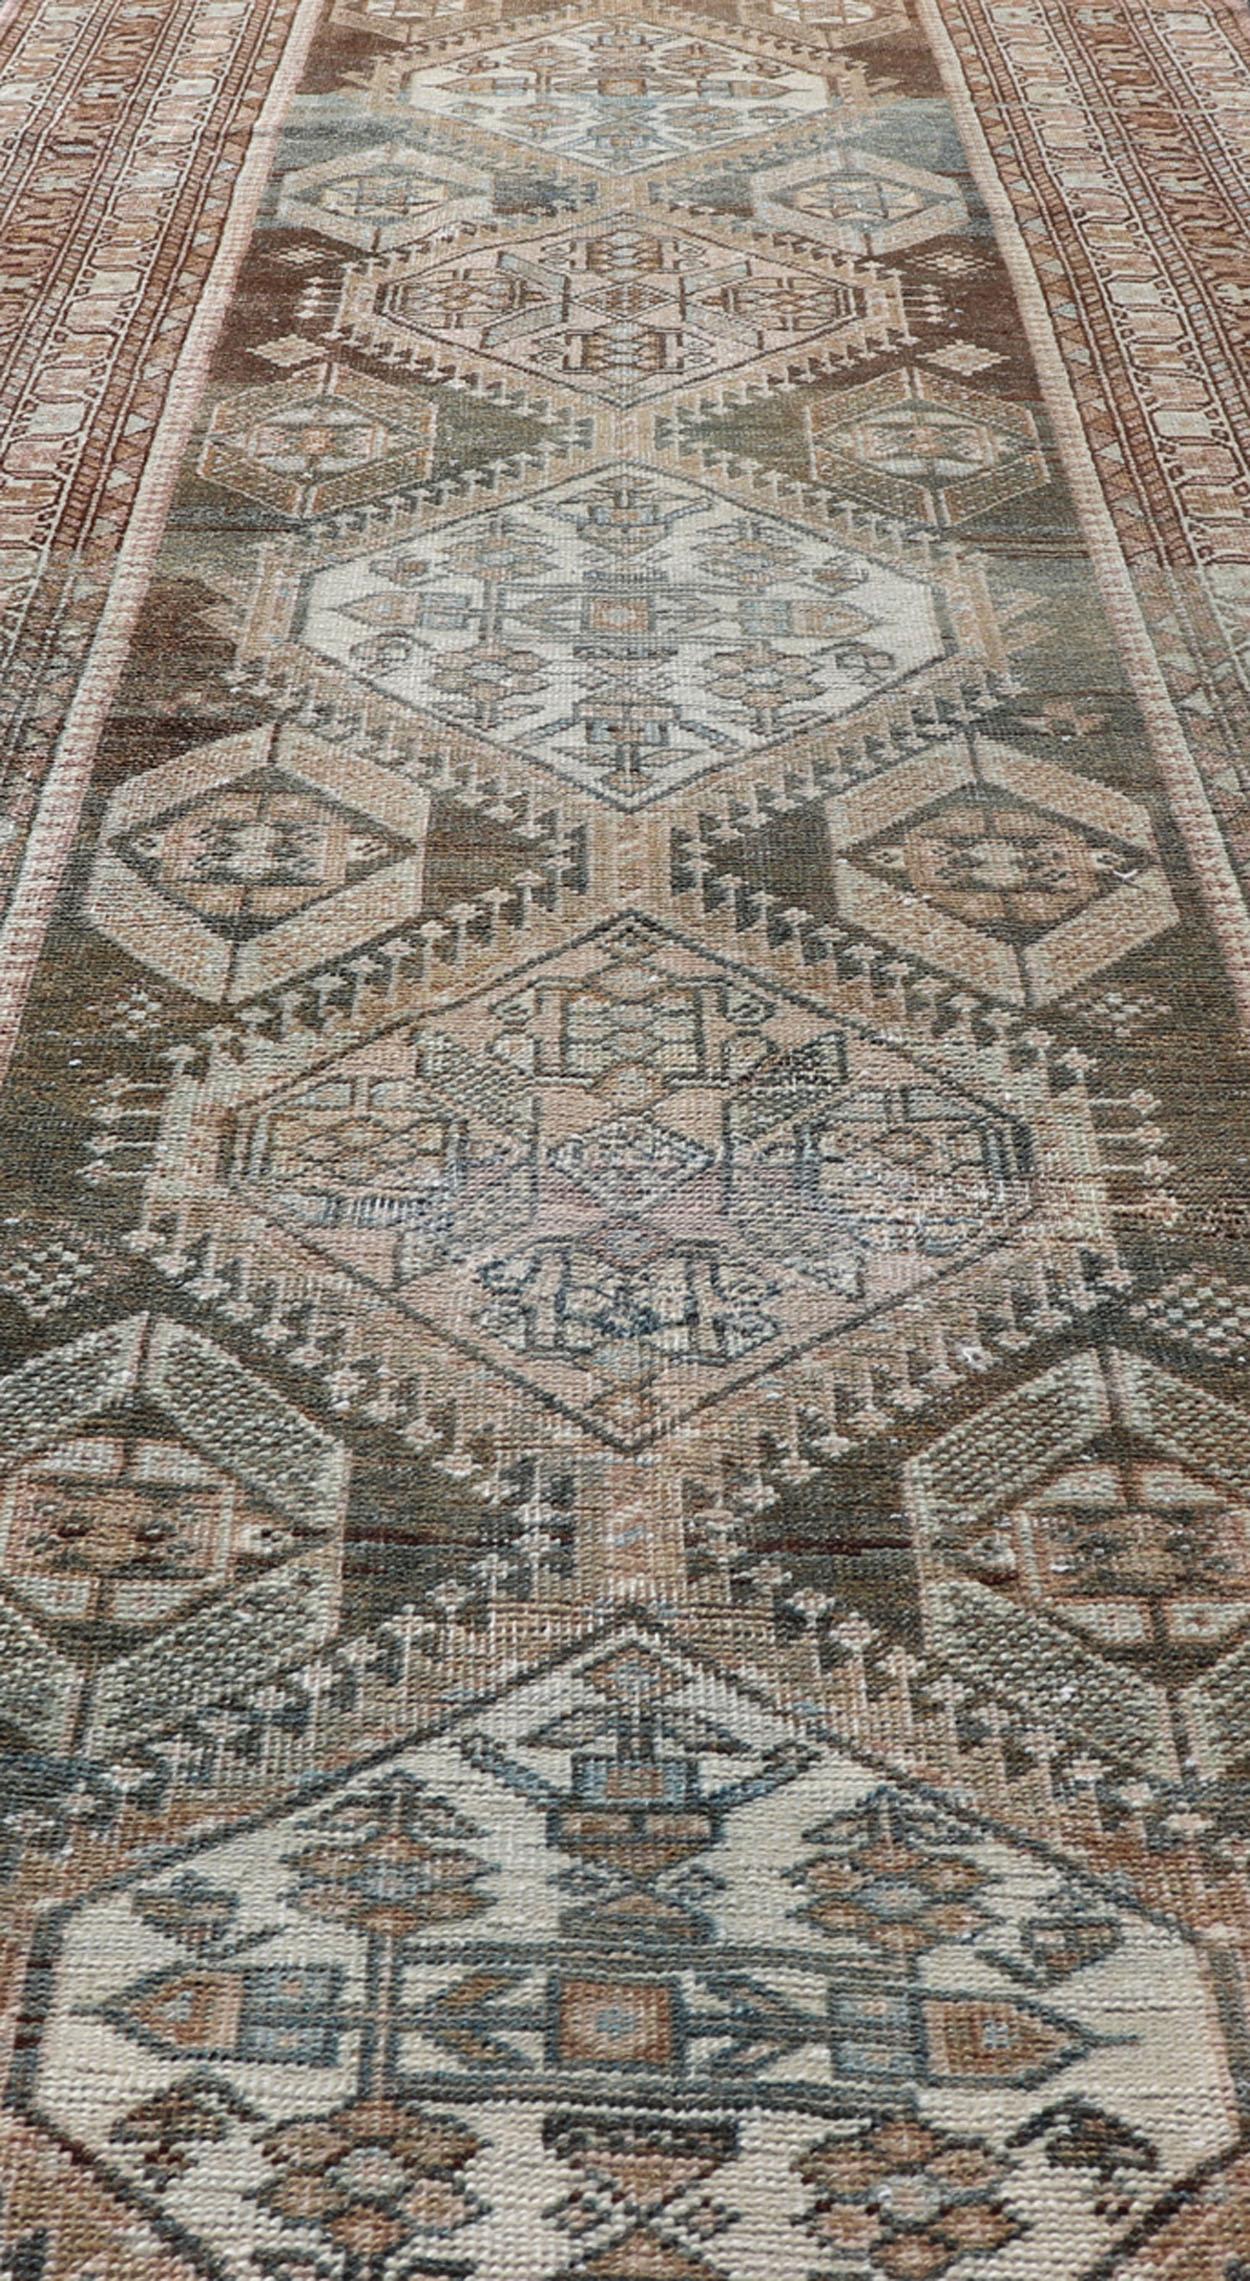 Antique Persian Hamadan Long Runner in Brown, Gray and Charcoal Background For Sale 2